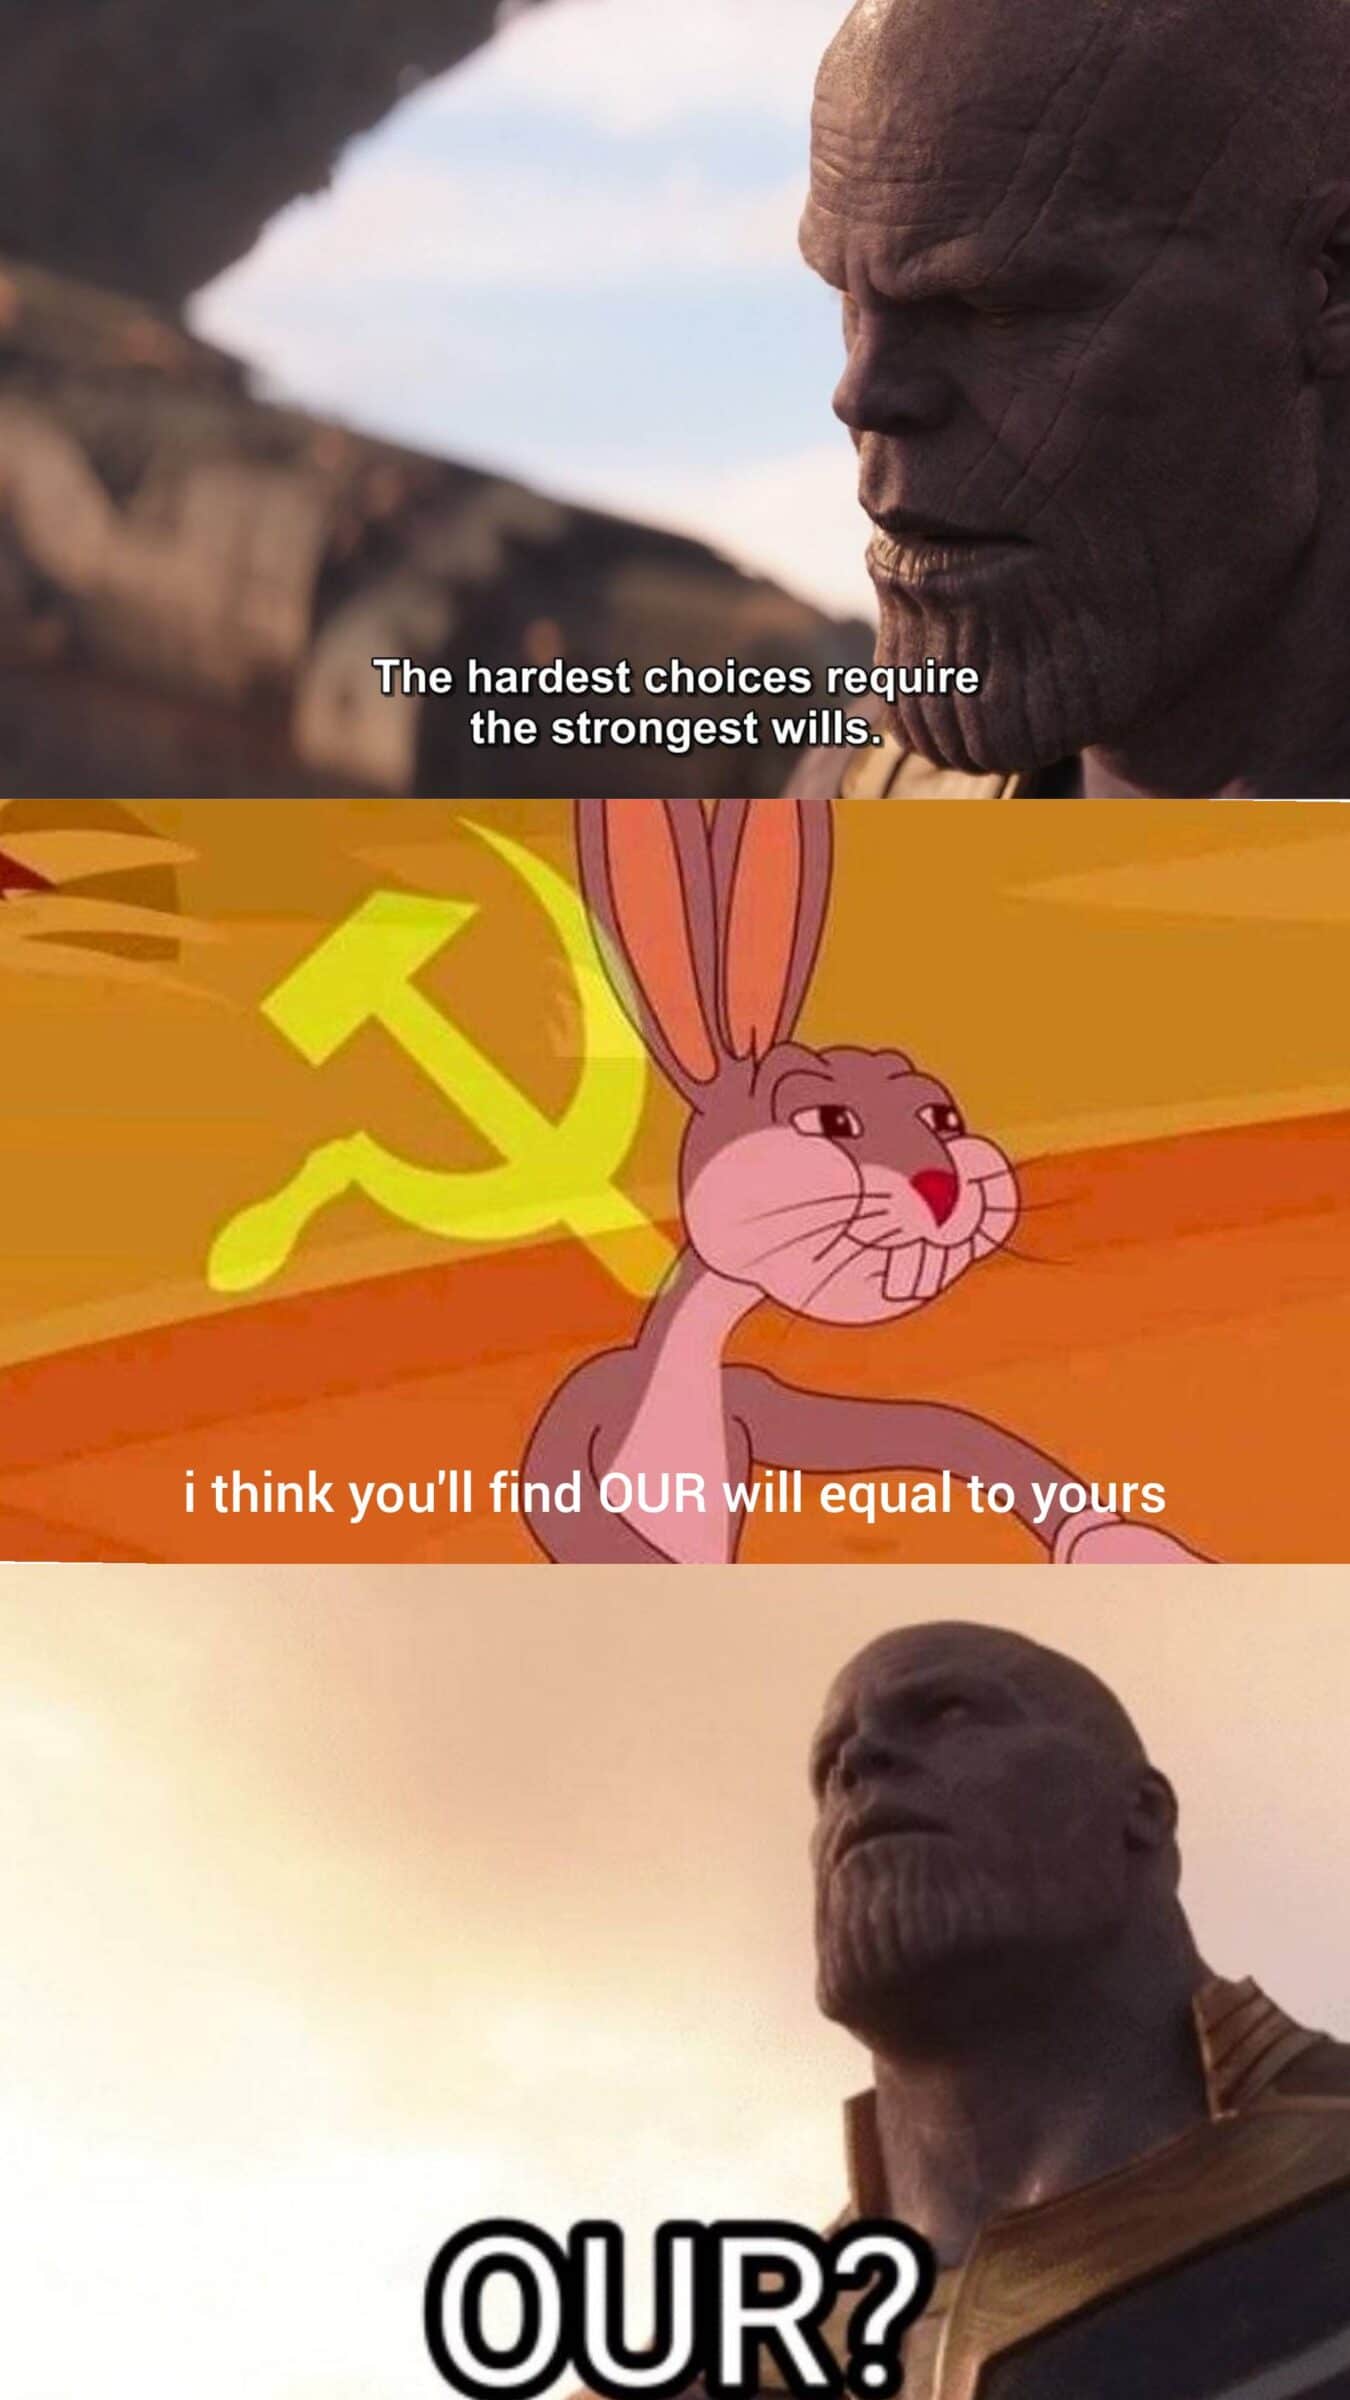 Thanos, USSR Avengers Memes Thanos, USSR text: The hardest choices require the strongest wills. i think you'll find UR ill equal to y;yrs OUR?E 